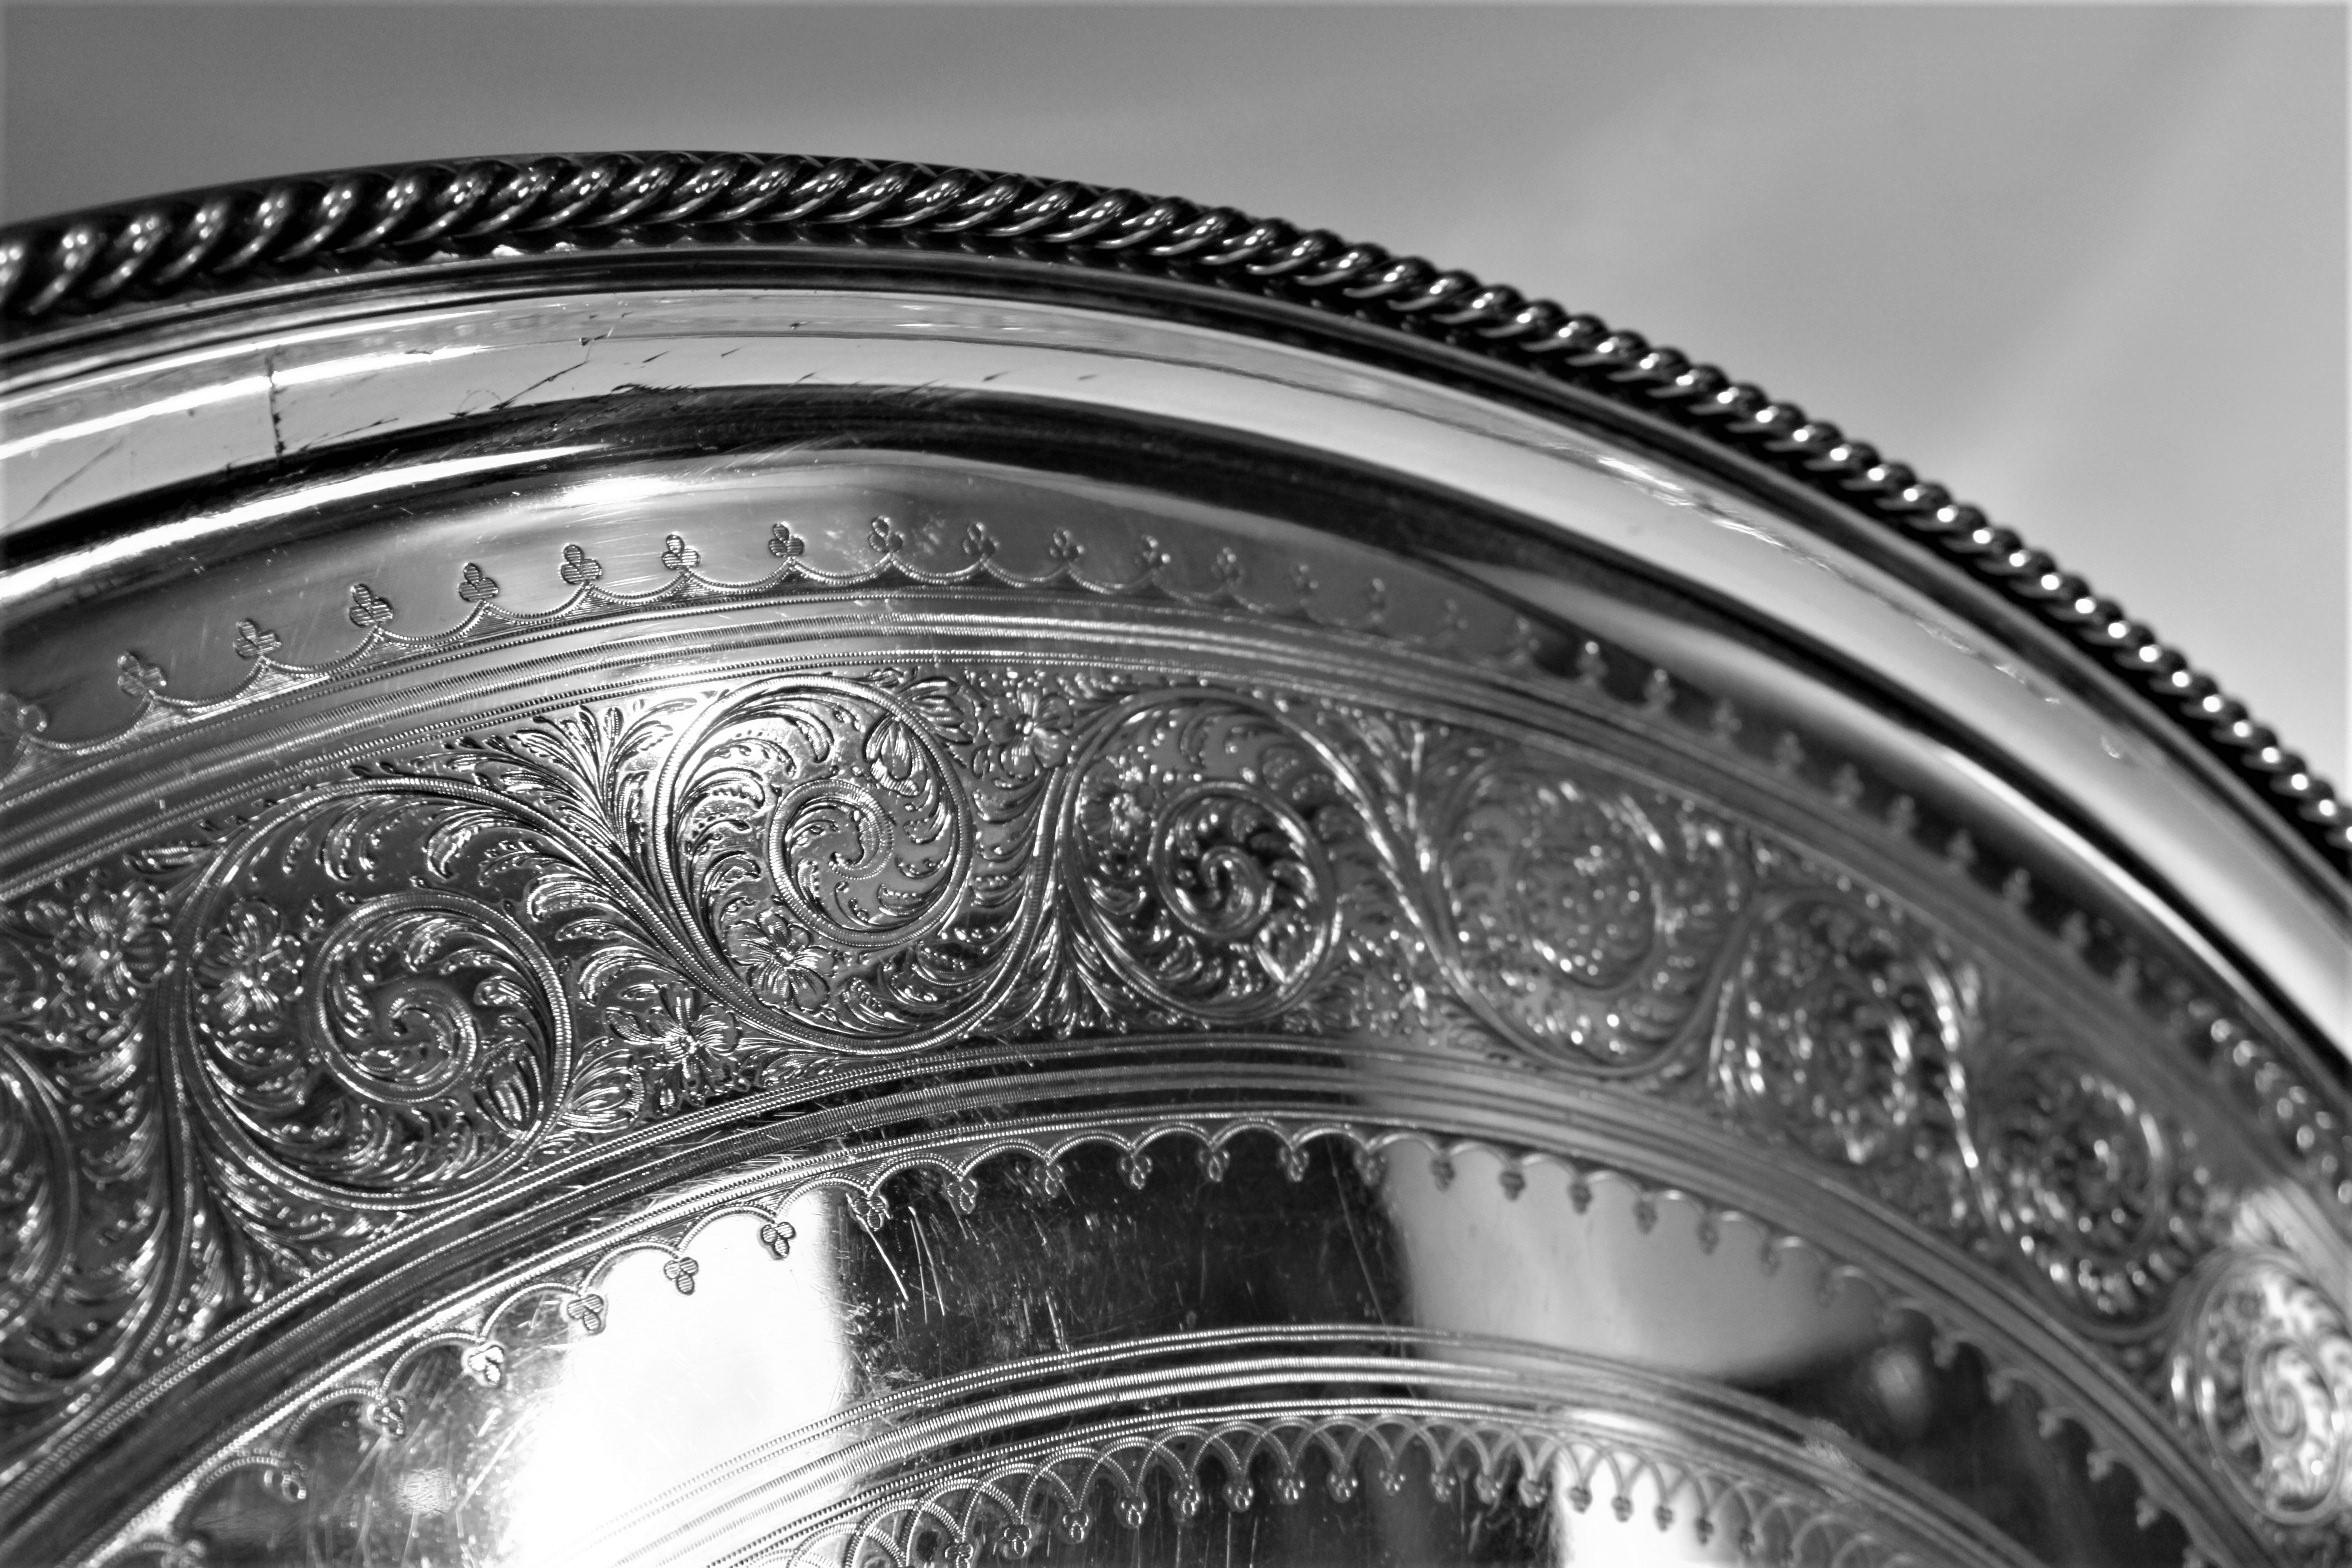 Metal Antique English Silver Plated Serving Tray with Ornate Engraving and Handles For Sale